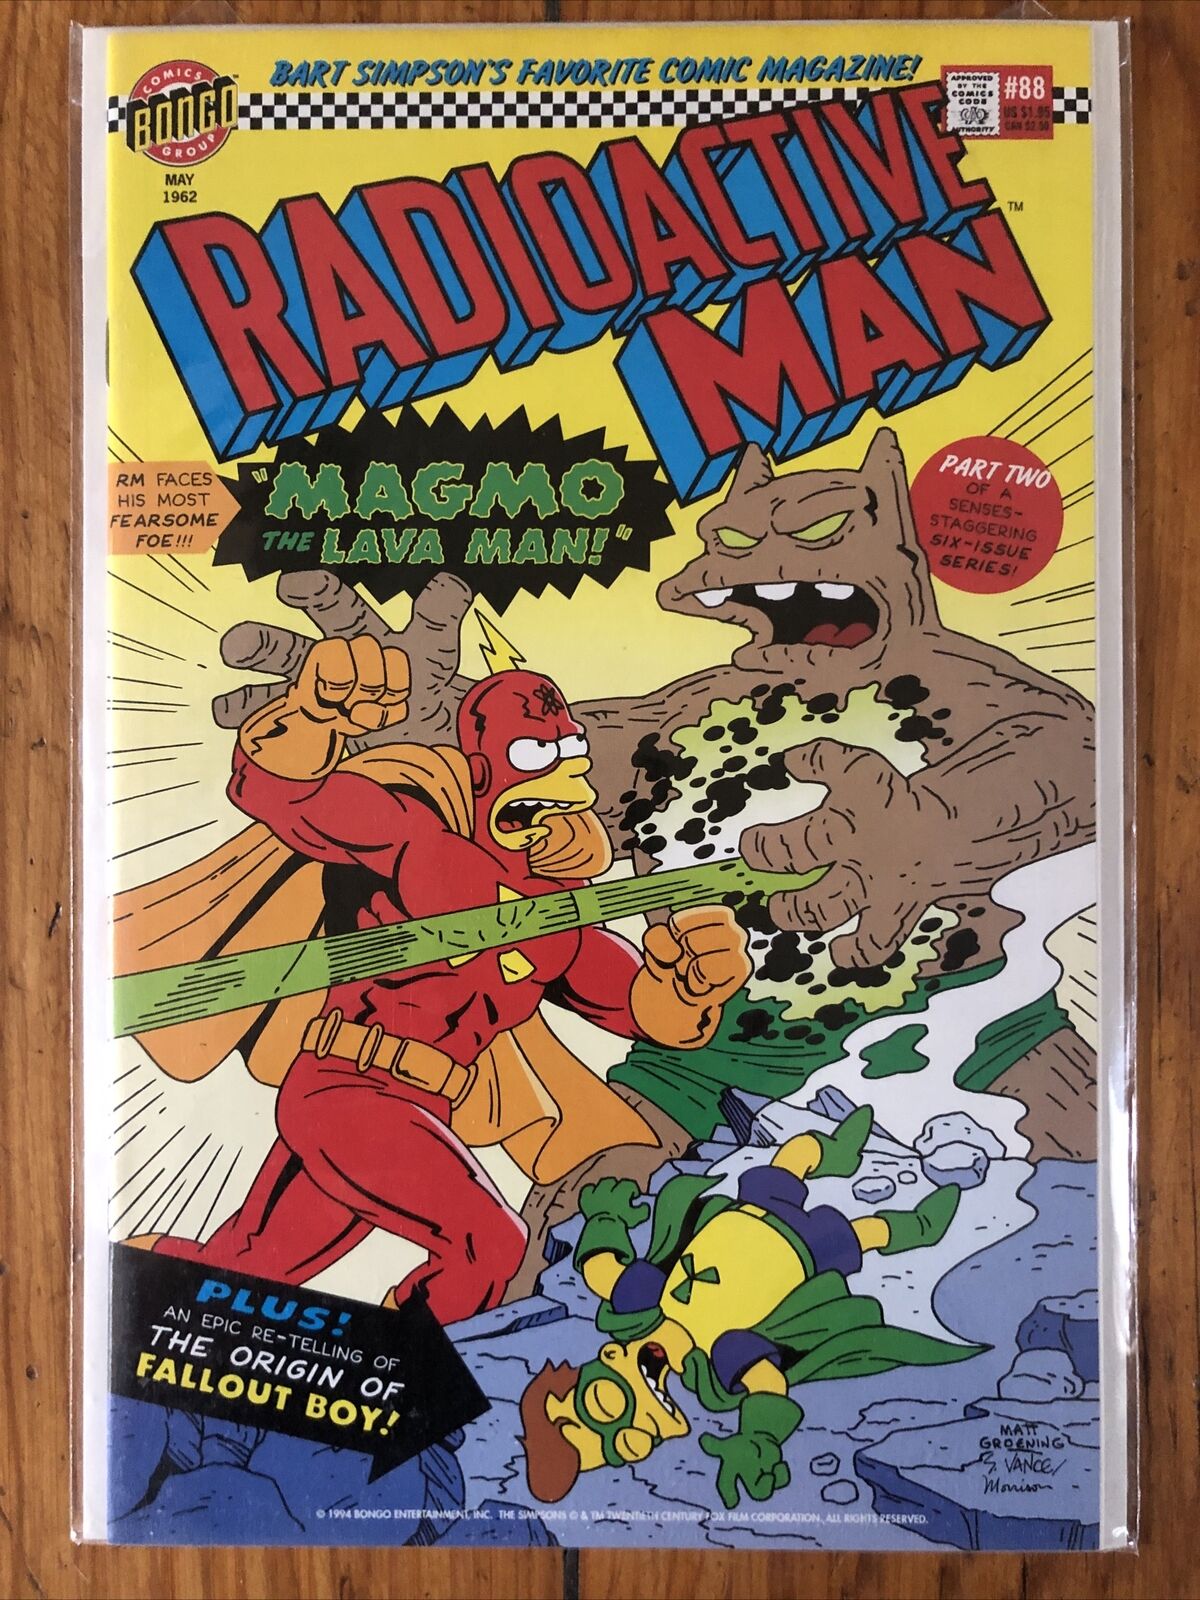 Radioactive Man #88 (Part 2 of 6) by Bill Morrison, Steve/Cindy Vance NEW NM/NM+